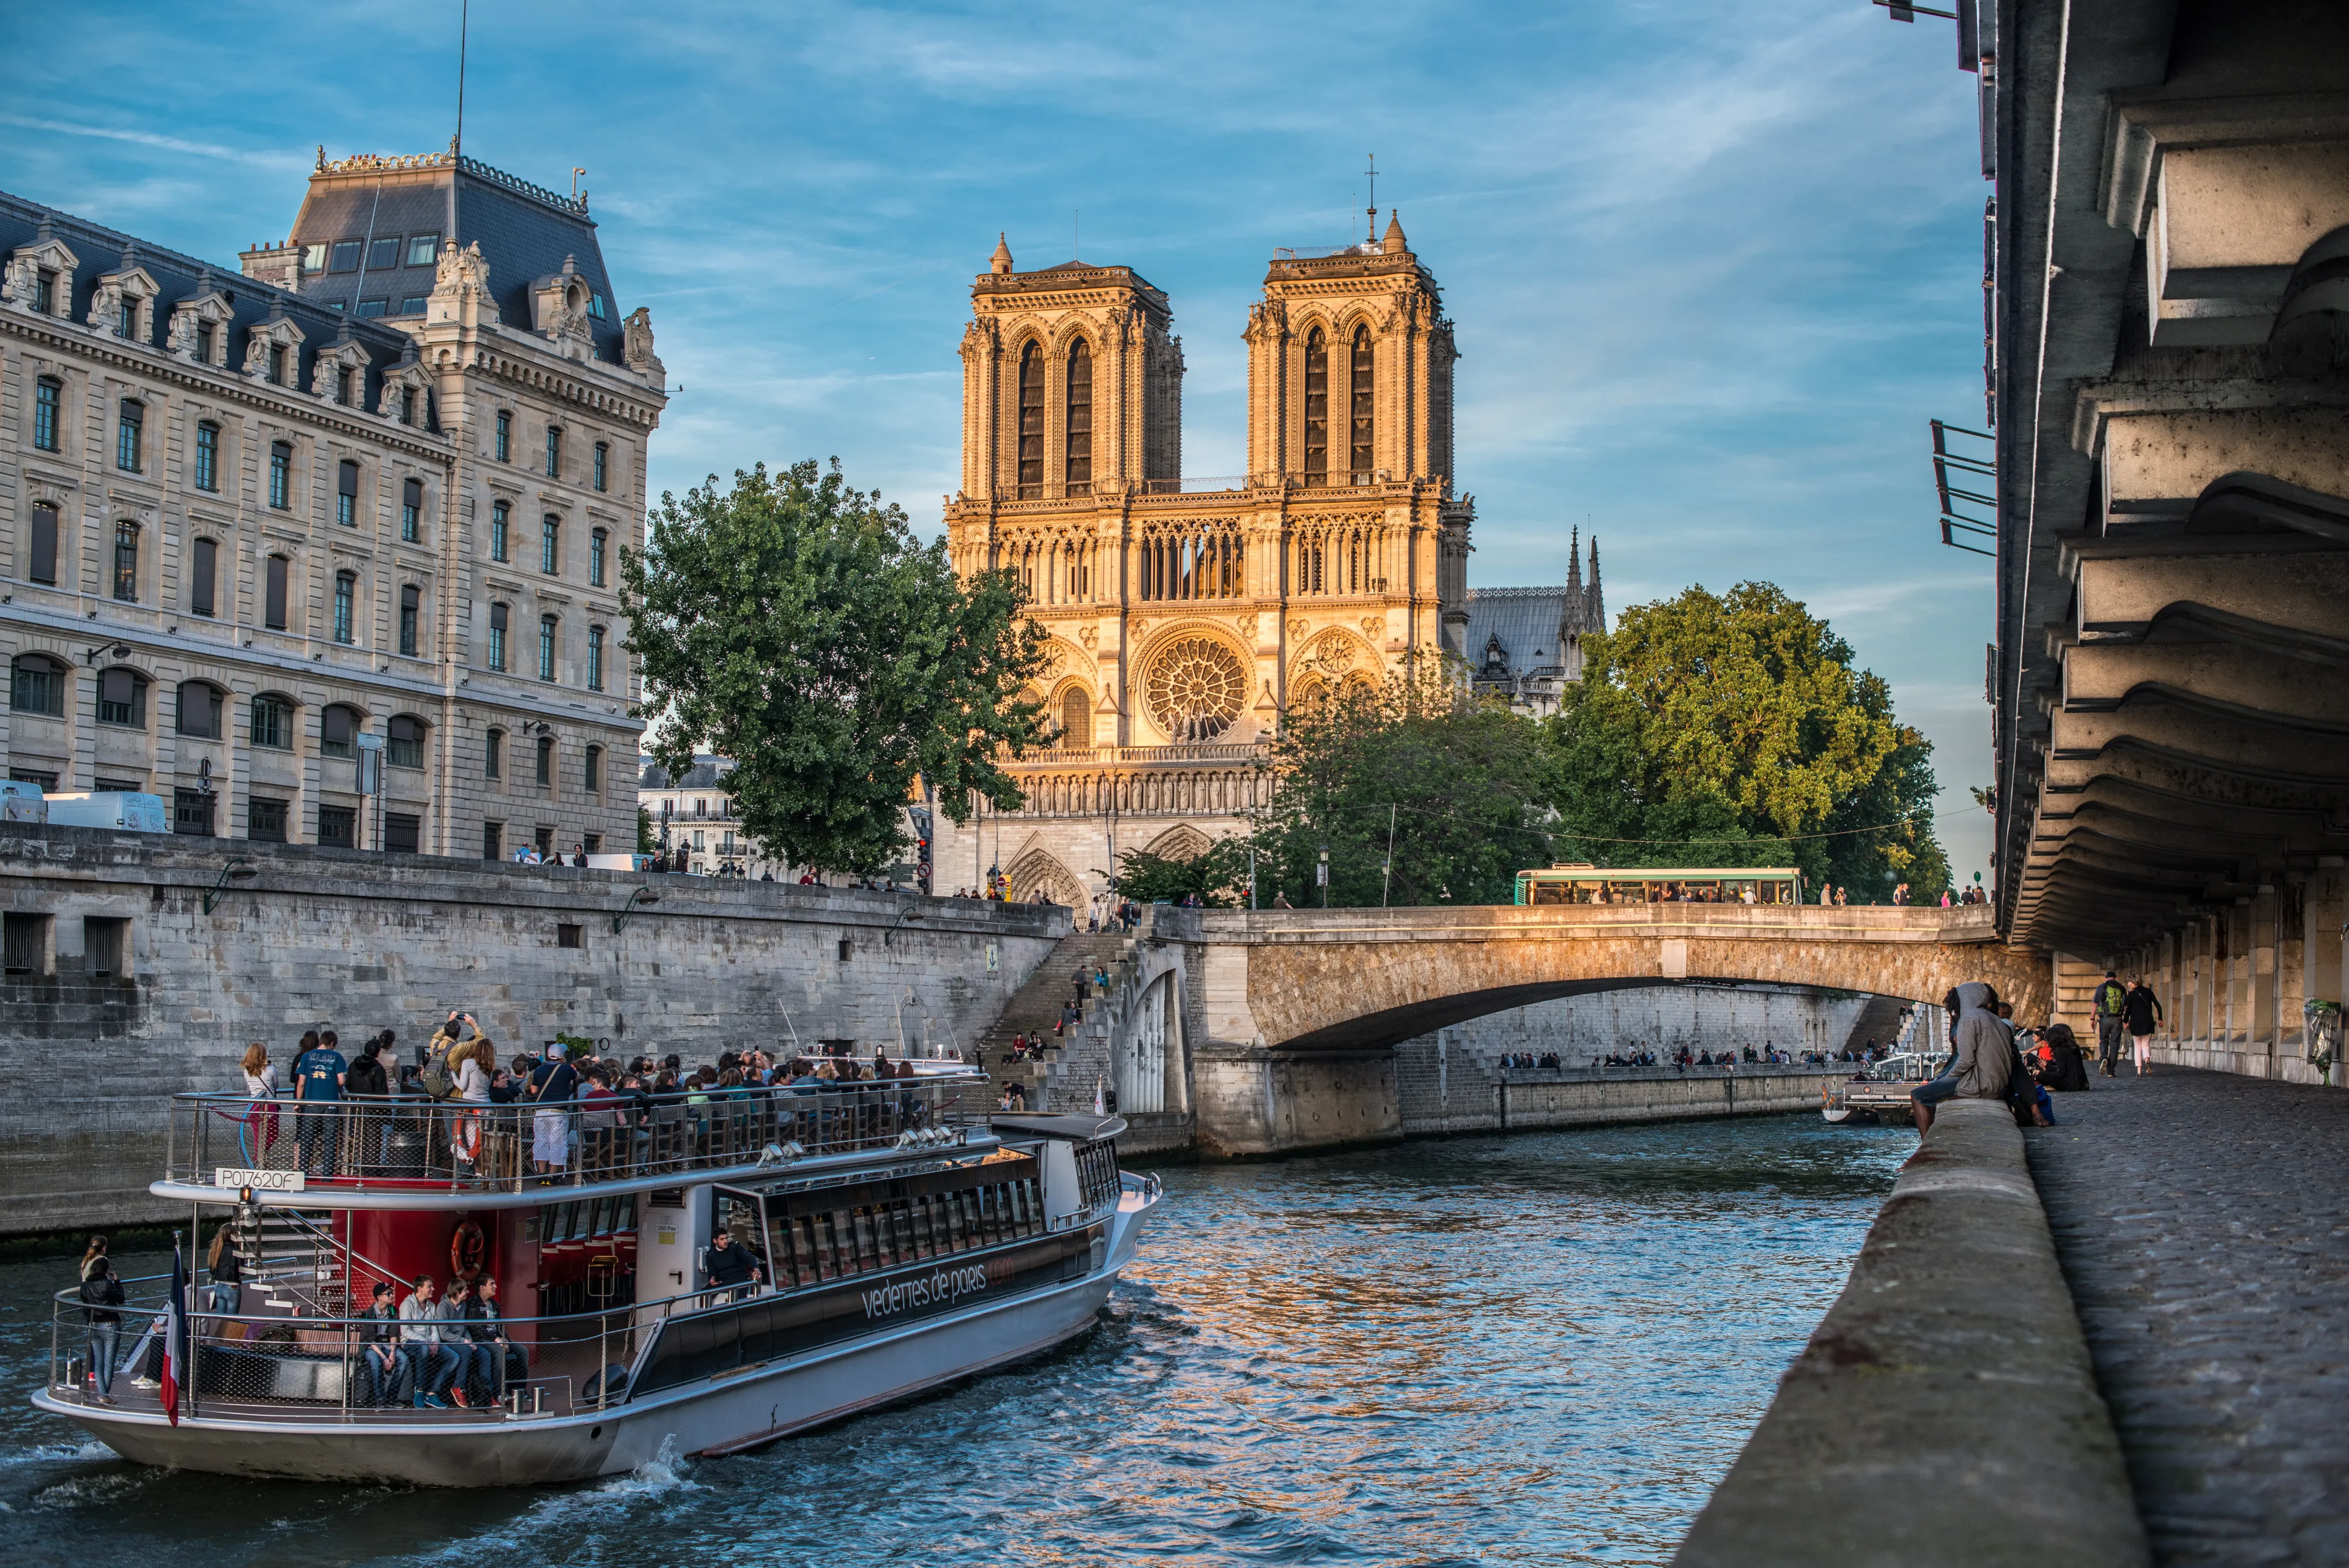 notre dame cathedral in paris france